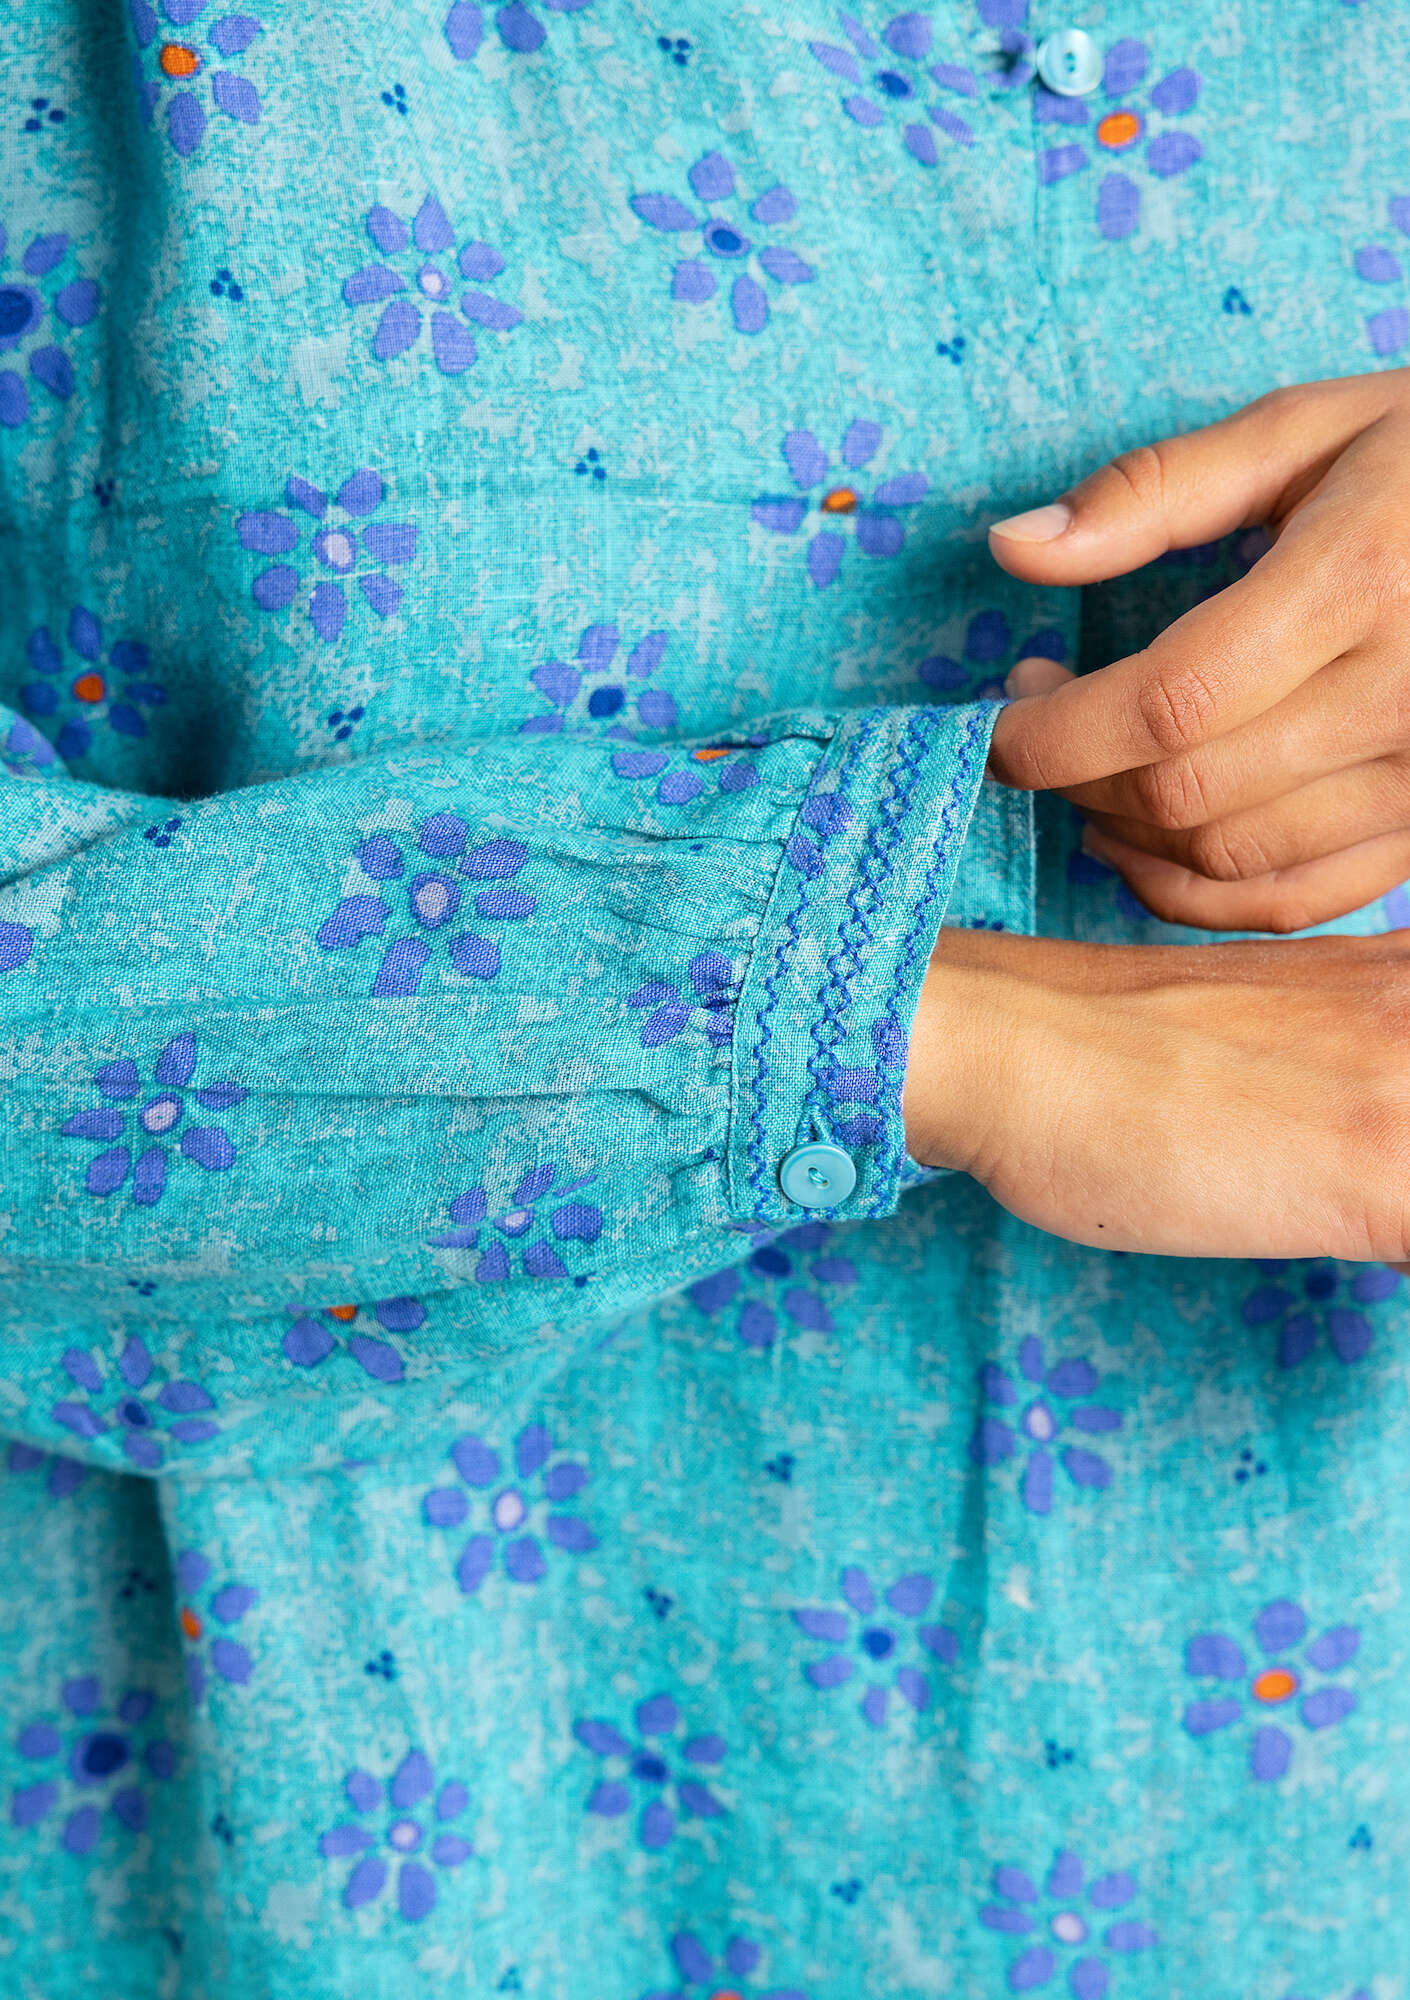 “Ester” woven blouse in linen meadow brook/patterned thumbnail